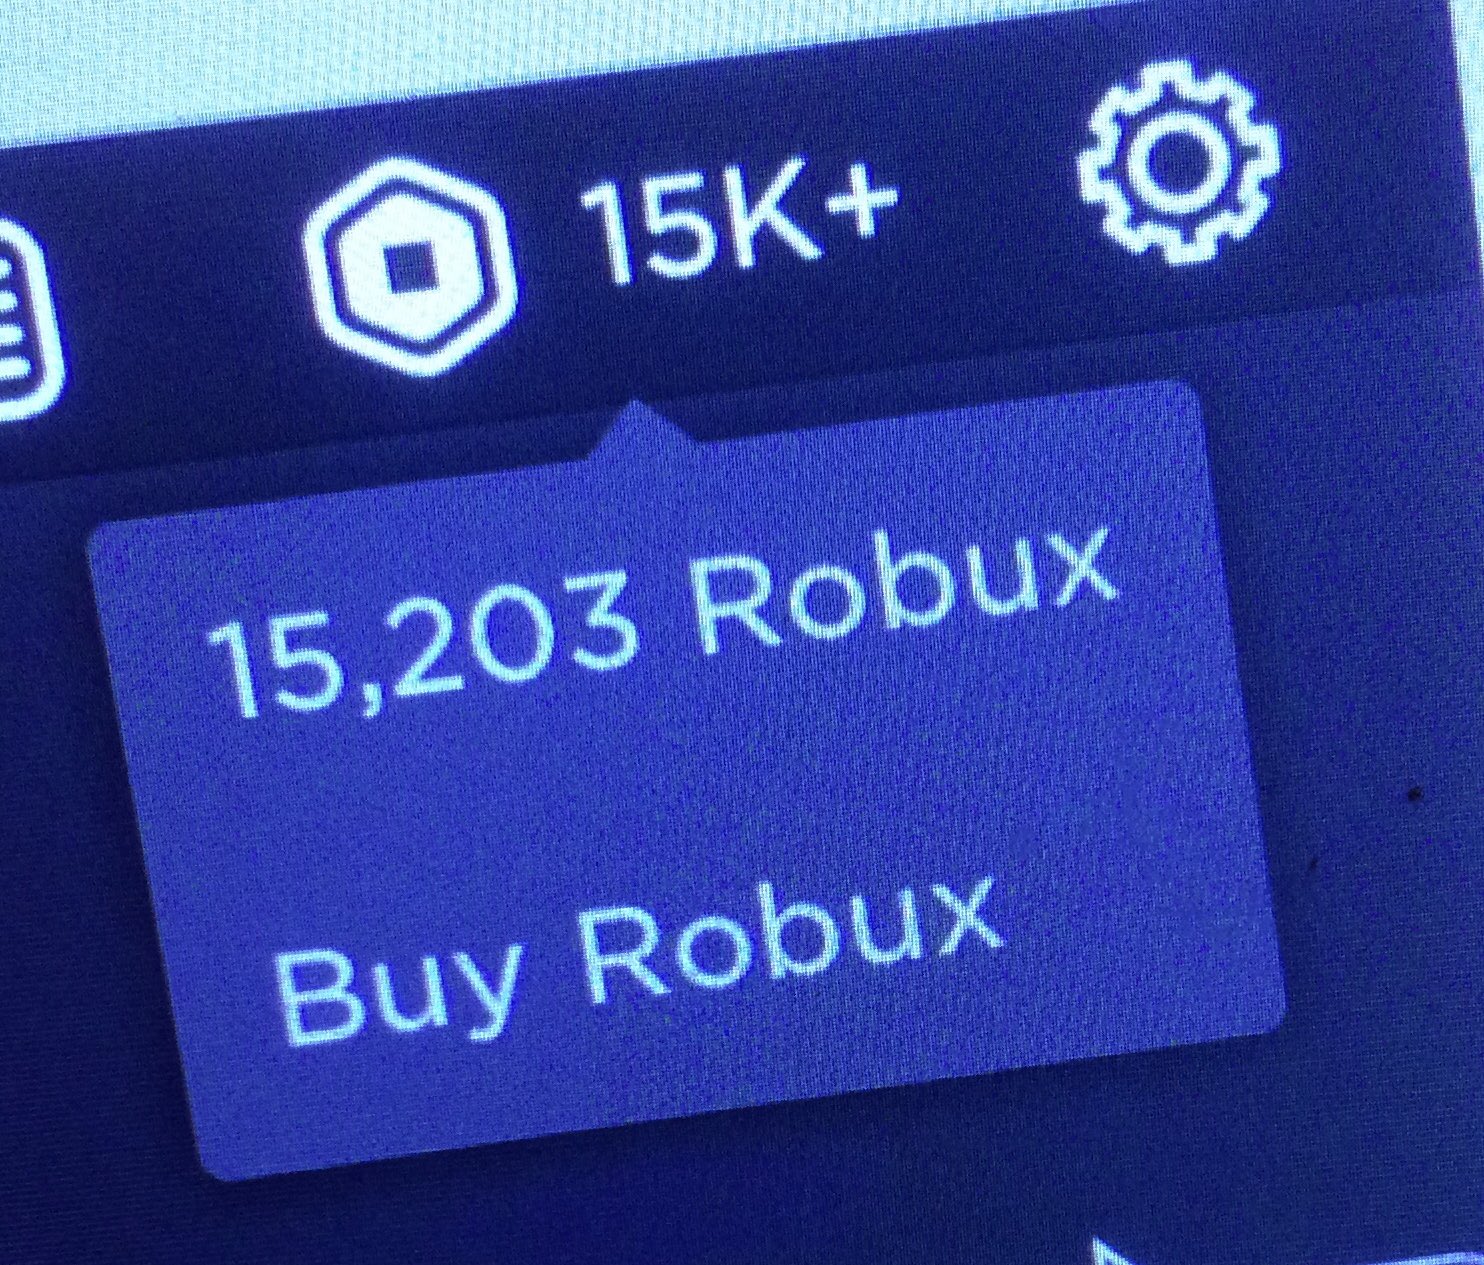 Anyone? •• #roblox #trusted #crosstrade #proofs #rh #mm2 #robux #value